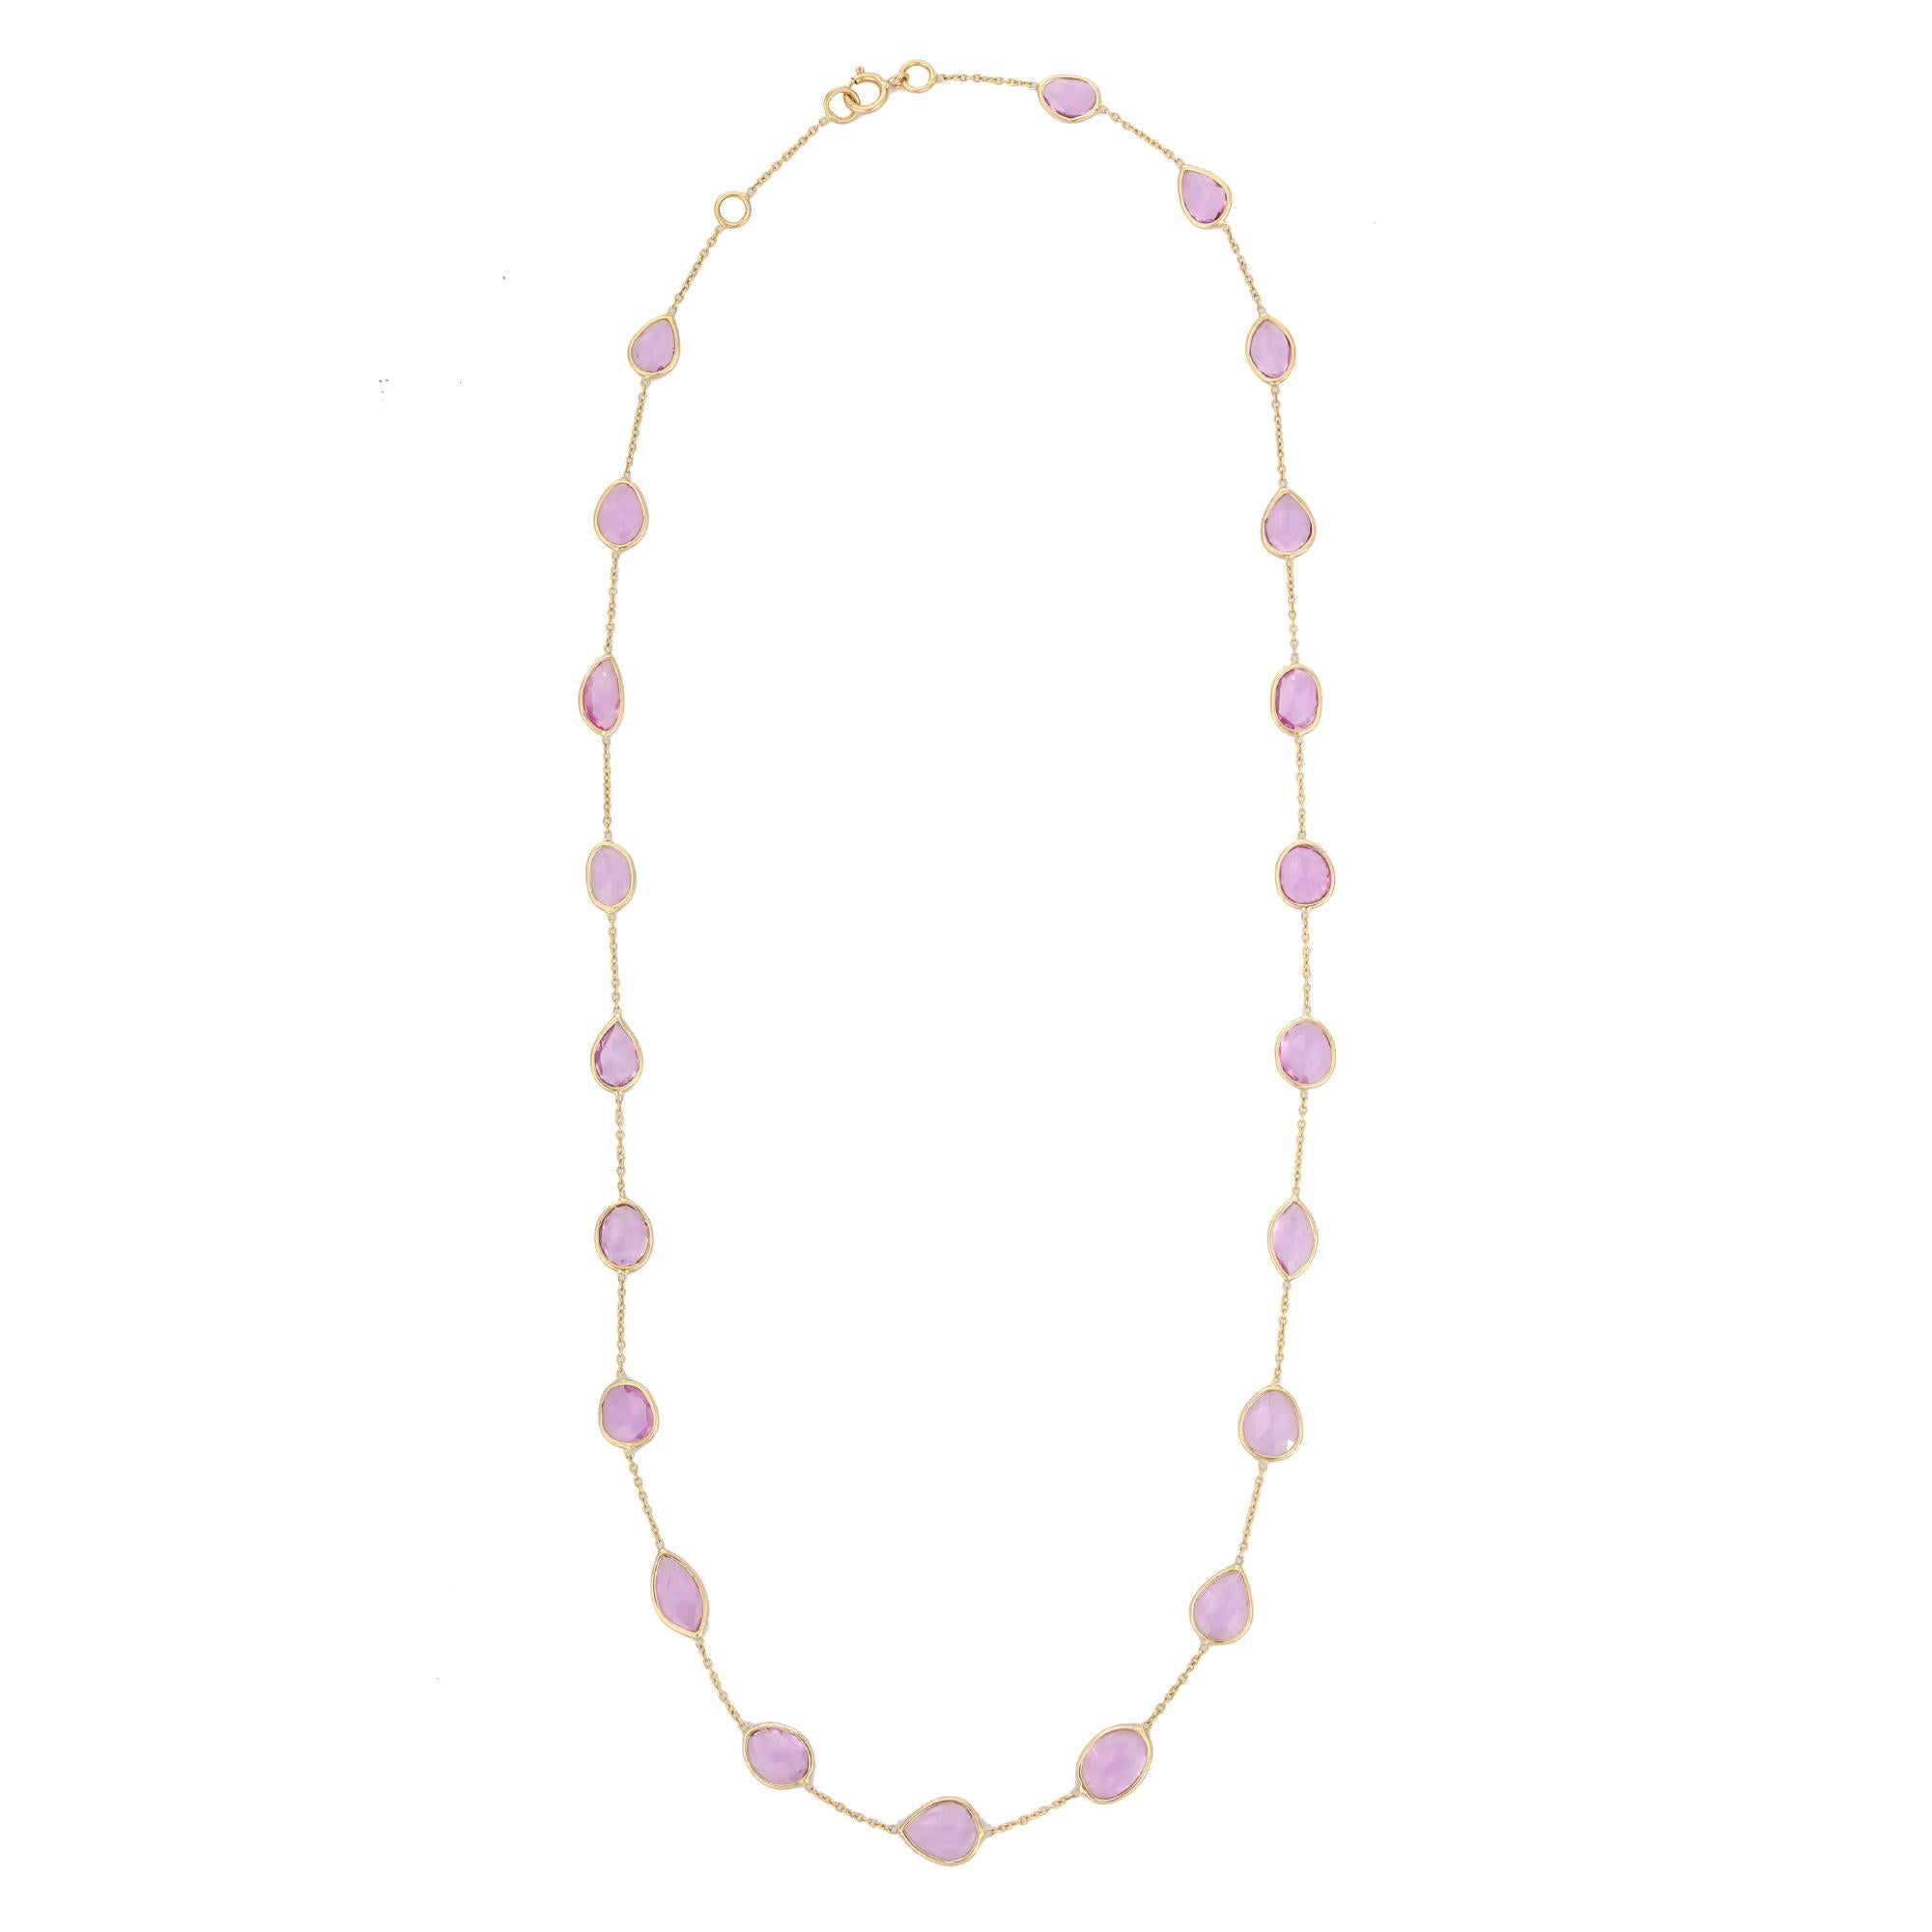 Mixed Cut 10.7 Carat Pink Sapphire Chain Necklace in 18K Yellow Gold For Sale